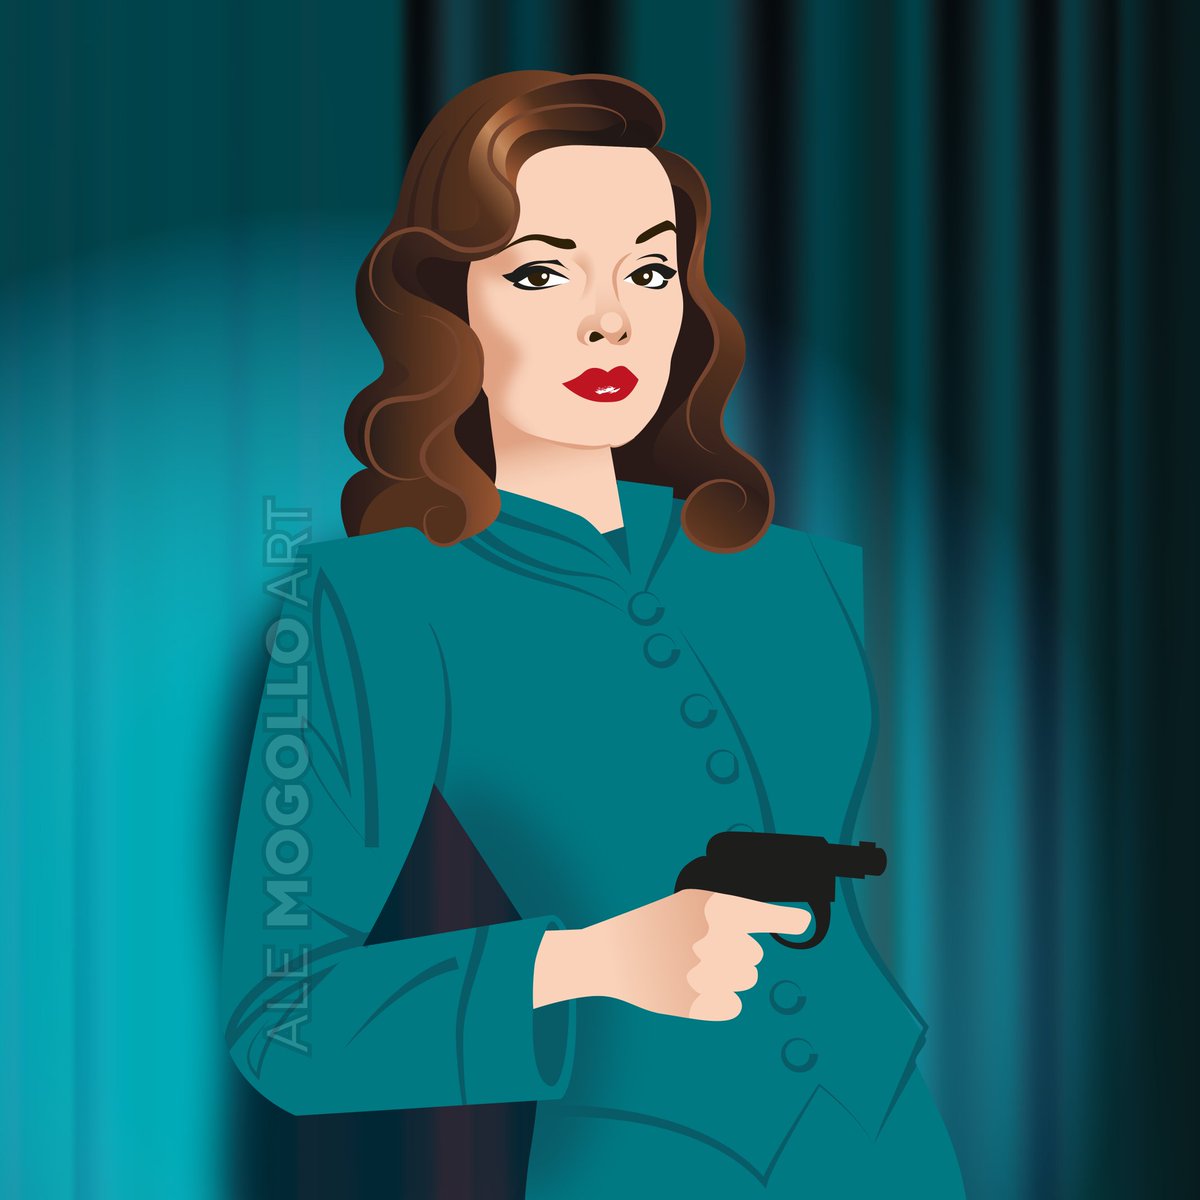 Remembering the sultry Jane Greer, the queen of film noir, on her birthday. Unforgettable as femme fatale Kathie Moffatt in Out of the Past.
#janegreer #outofthepast #robertmitchum #kirkdouglas #jacquestourneur #femmefatale #filmnoir #oldhollywood #TCMParty #AlejandroMogolloArt